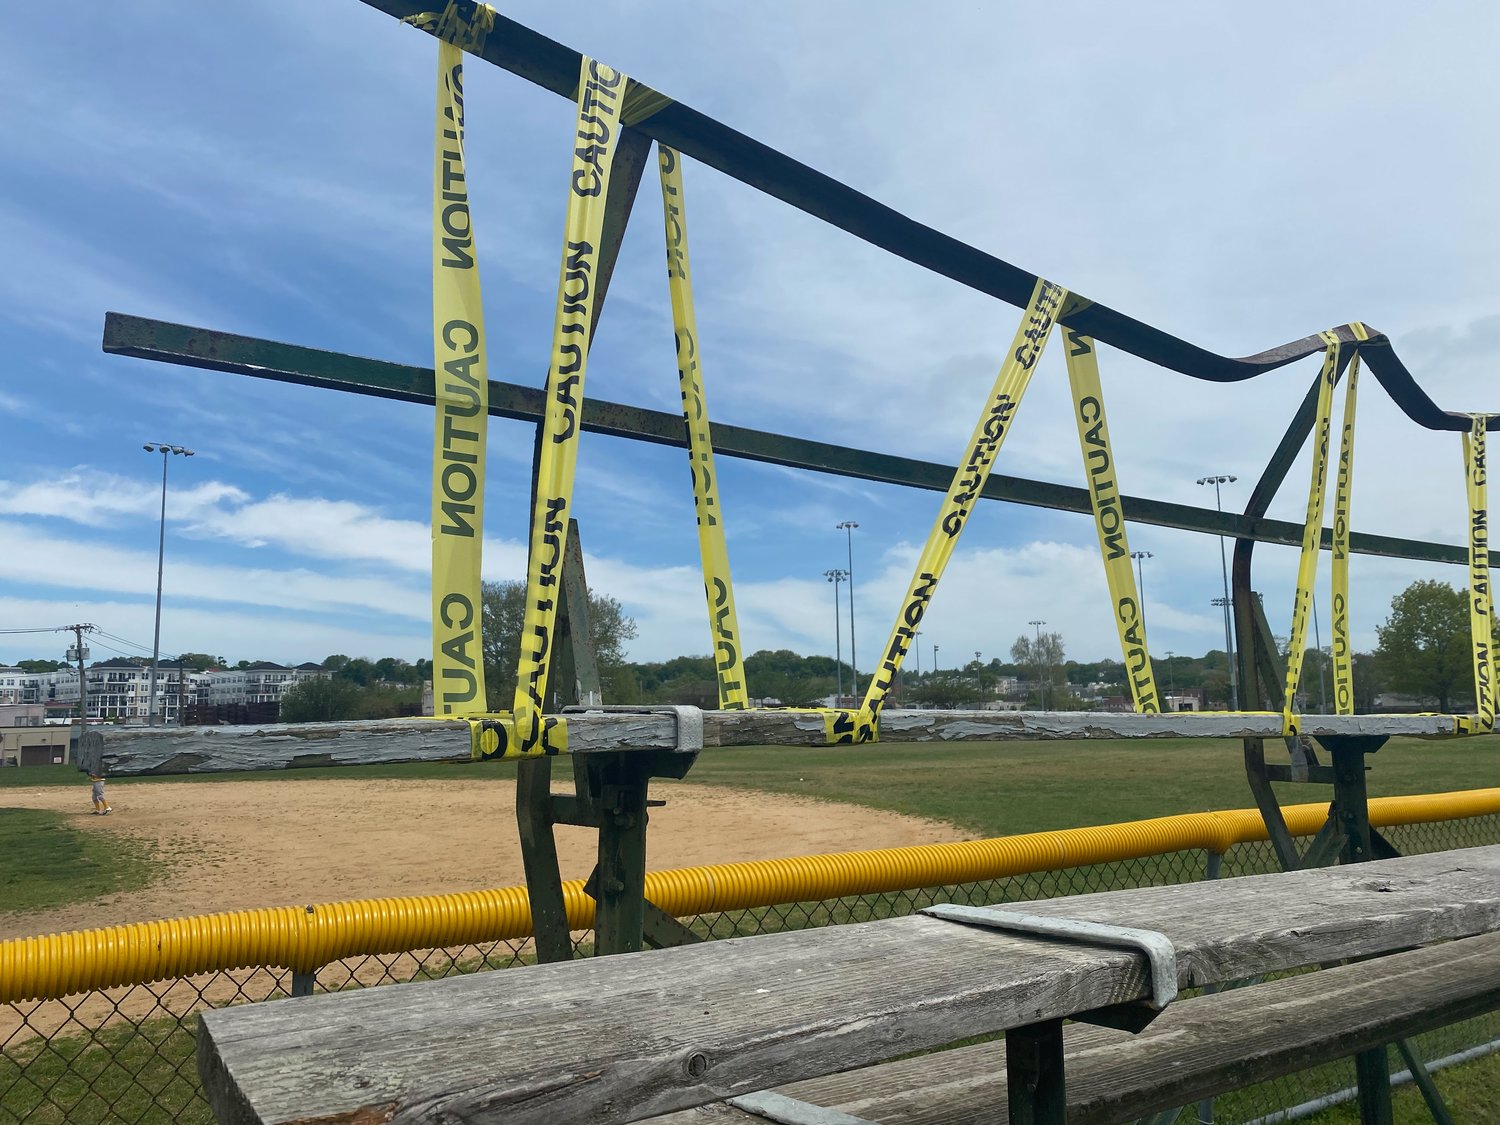 A bleacher at Field 7 in John Maccarone Memorial City Stadium is covered in yellow tape due to damages. New bleachers will be ordered by the city.